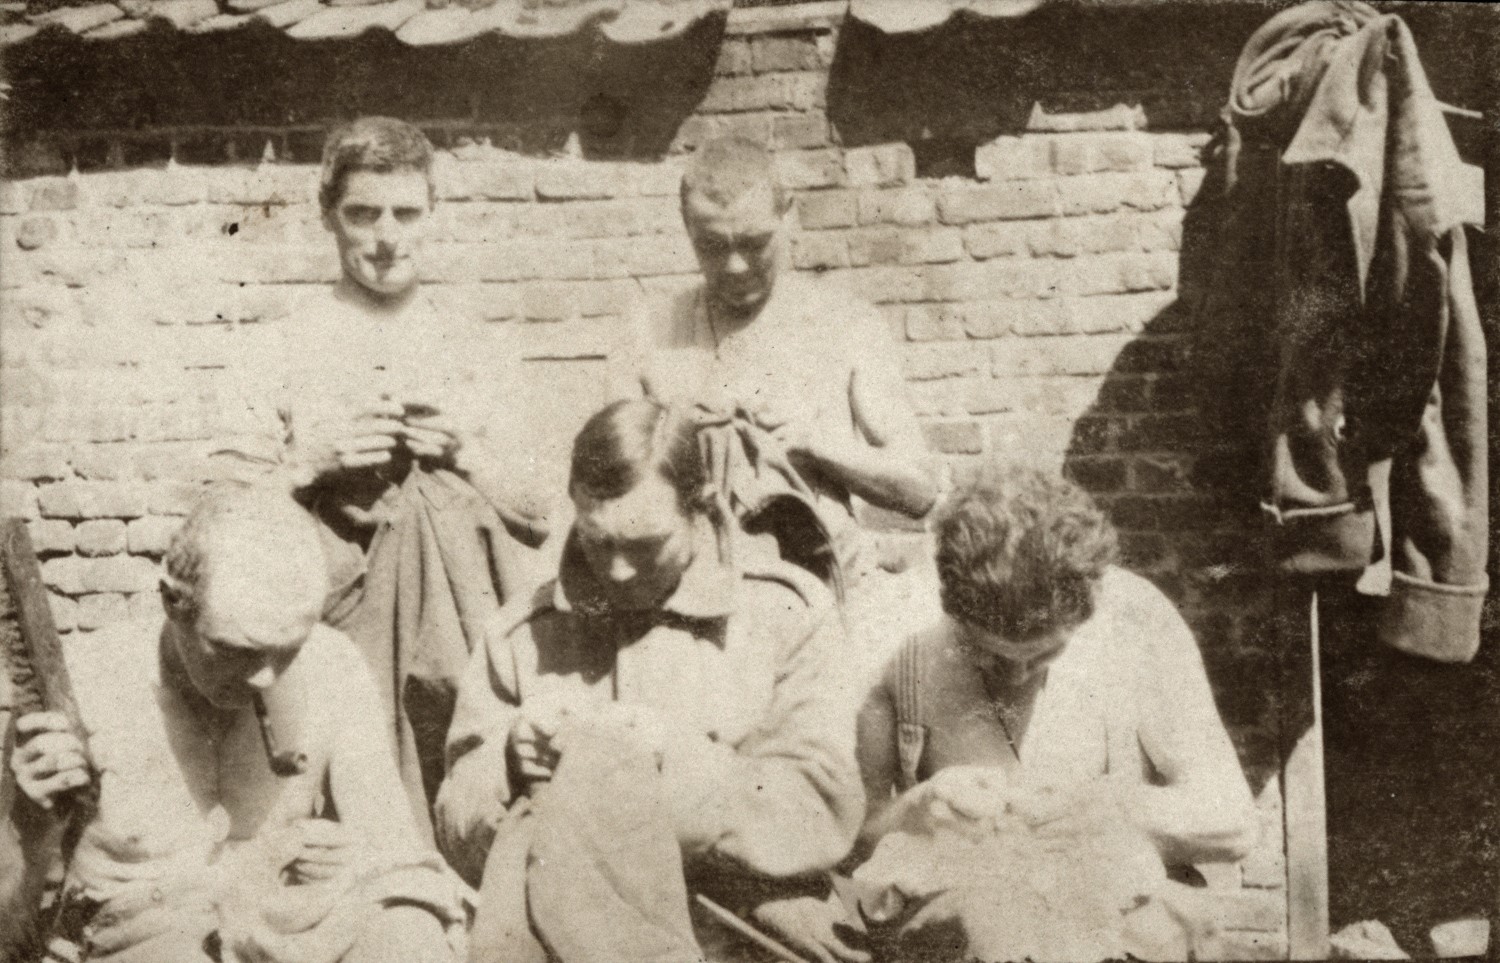 Soldiers mending clothes (or looking for lice).